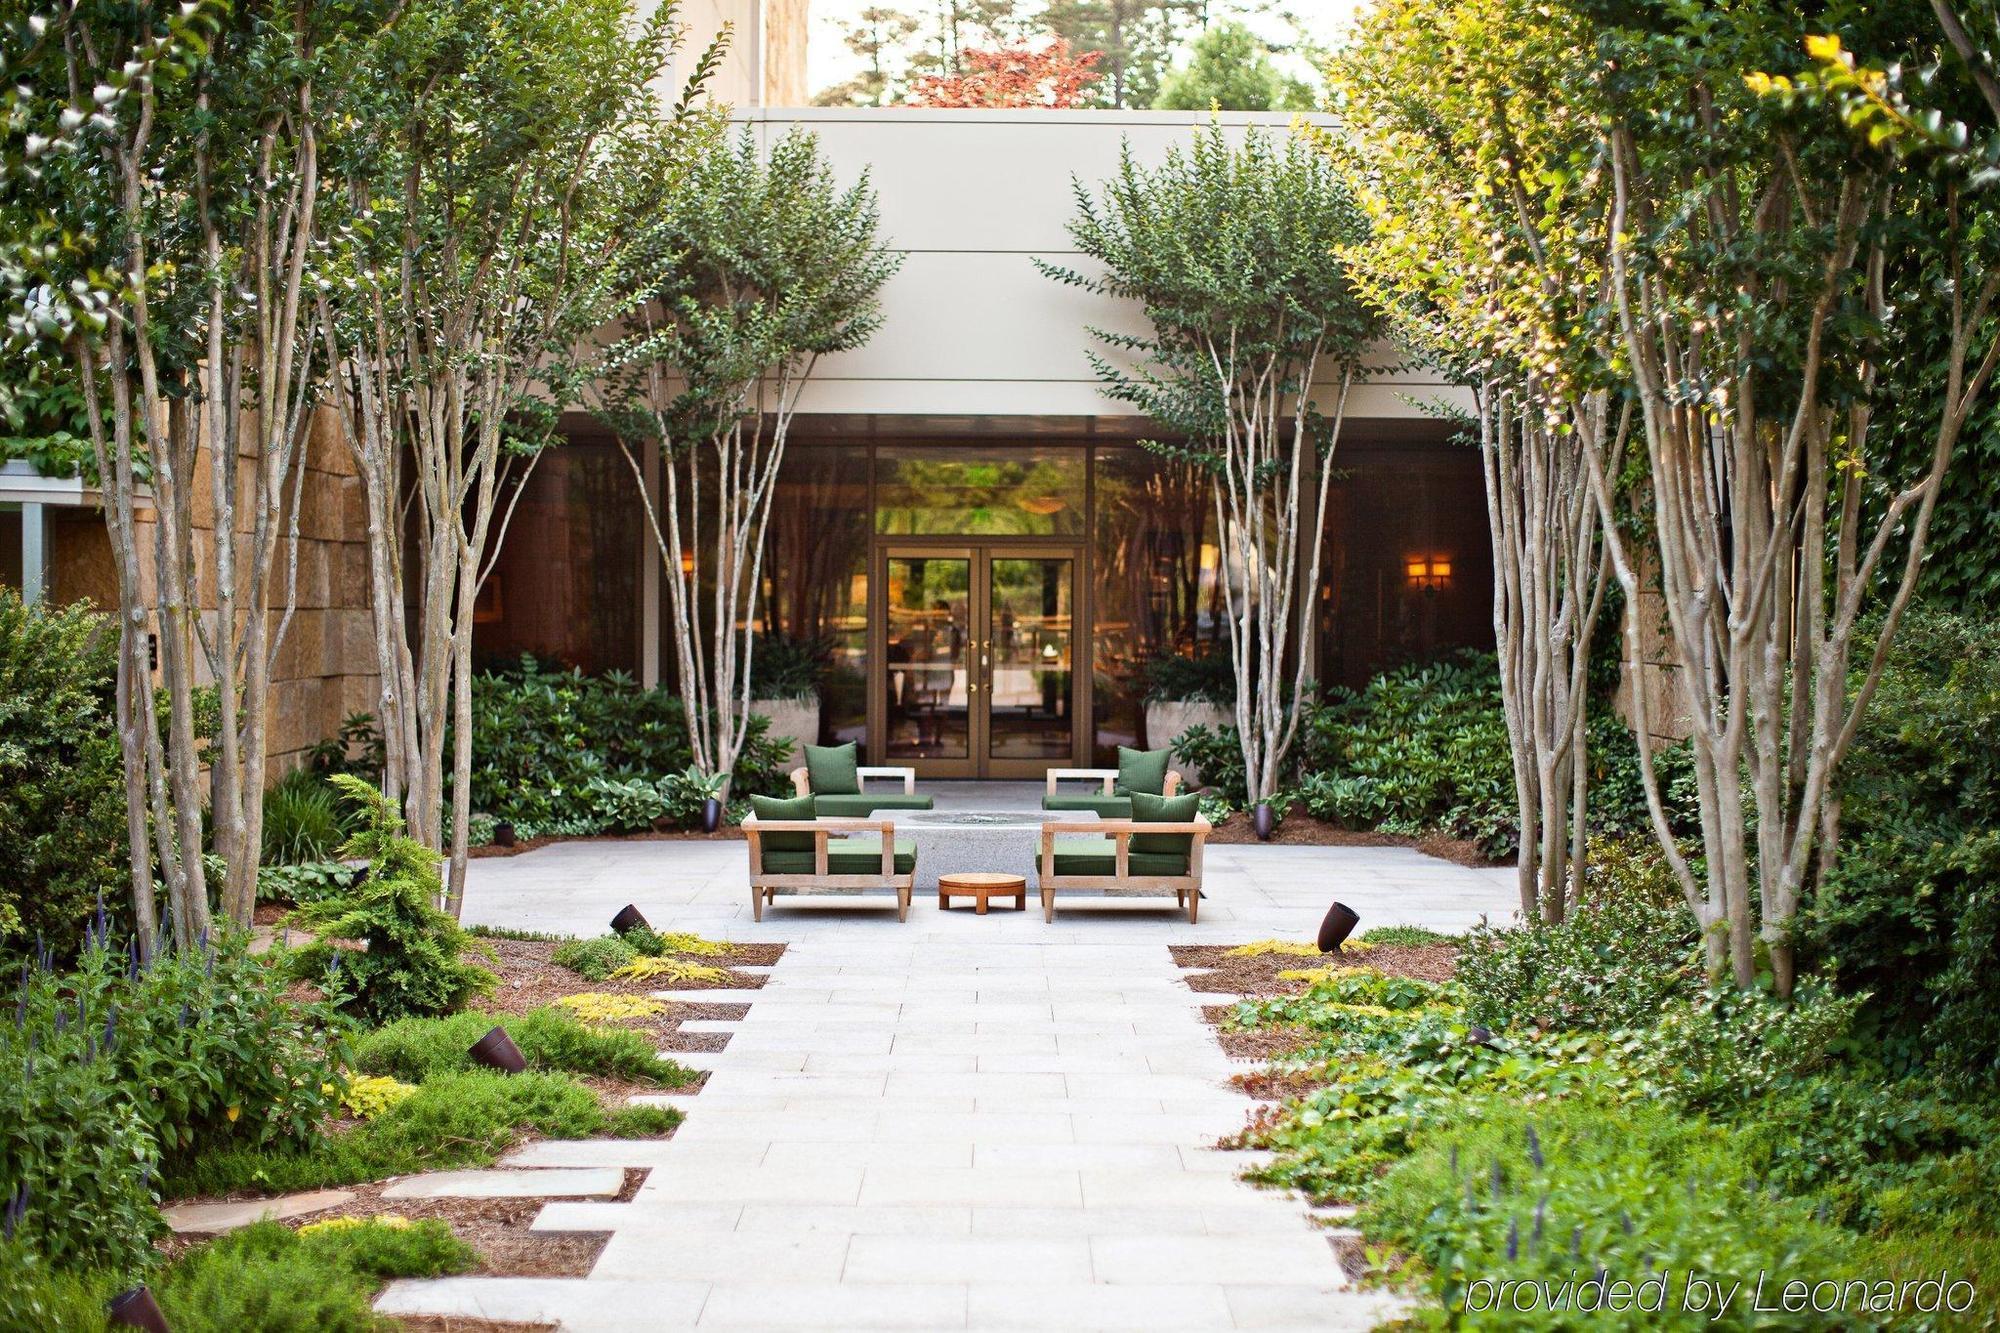 The Umstead Hotel And Spa Cary Exterior photo